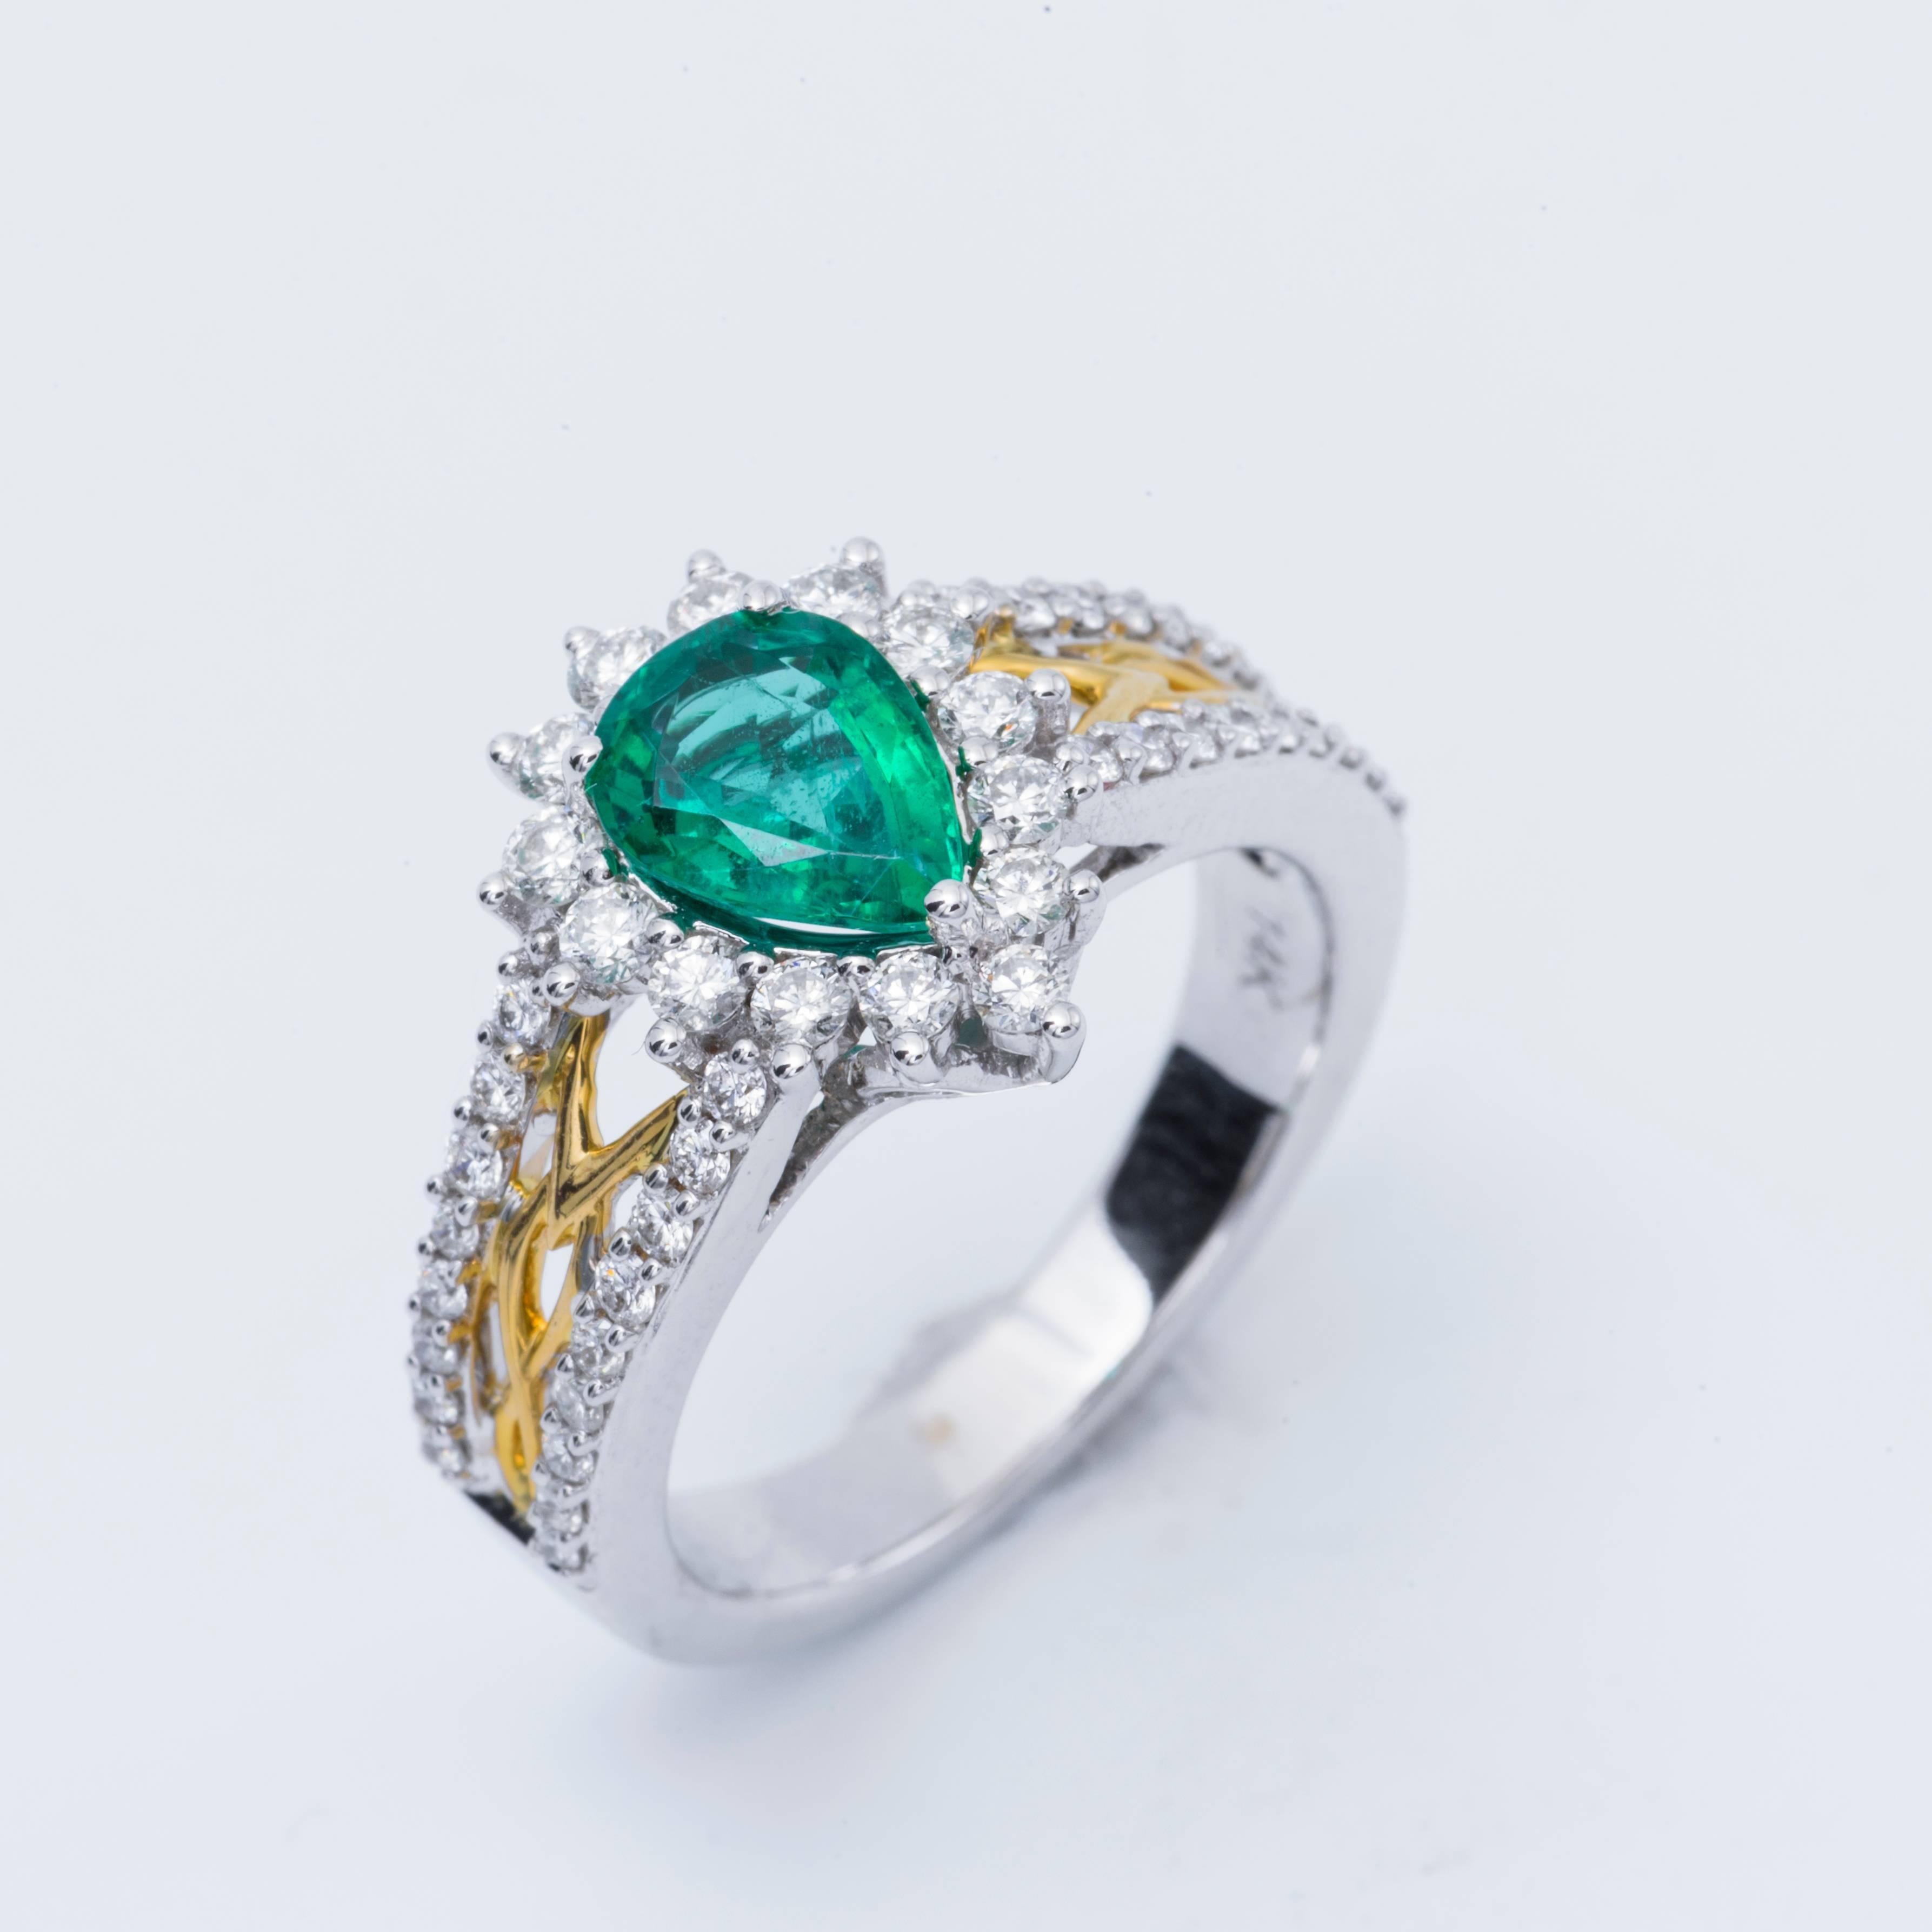 14 K White and Yellow Gold.The Zambian Emerald measures 7x6 mm and weighs 0.96 cts. The diamonds weight is 0.68 cts.
Its a gorgeous  classic timeless ring!!!
Size of ring 6.5 ( can be sized)